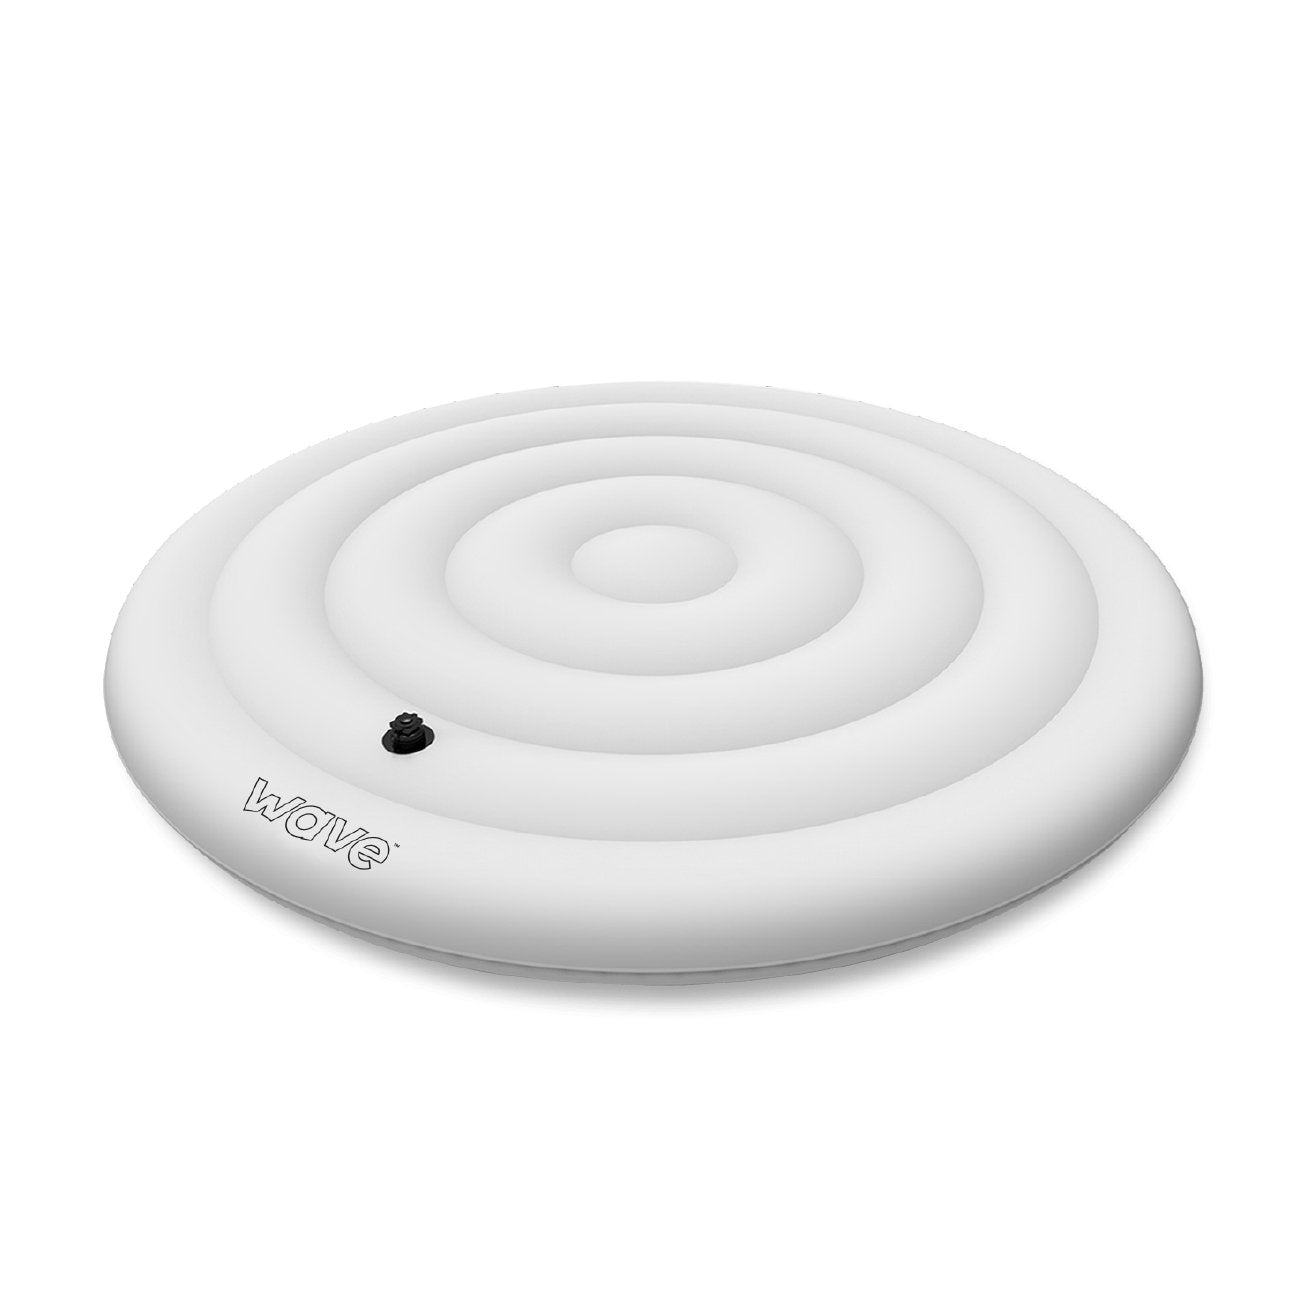 Wave Spa Round 6 Person Protective Thermal Efficient Inflatable Cover, White - Wave Spas Inflatable, foam Hot Tubs